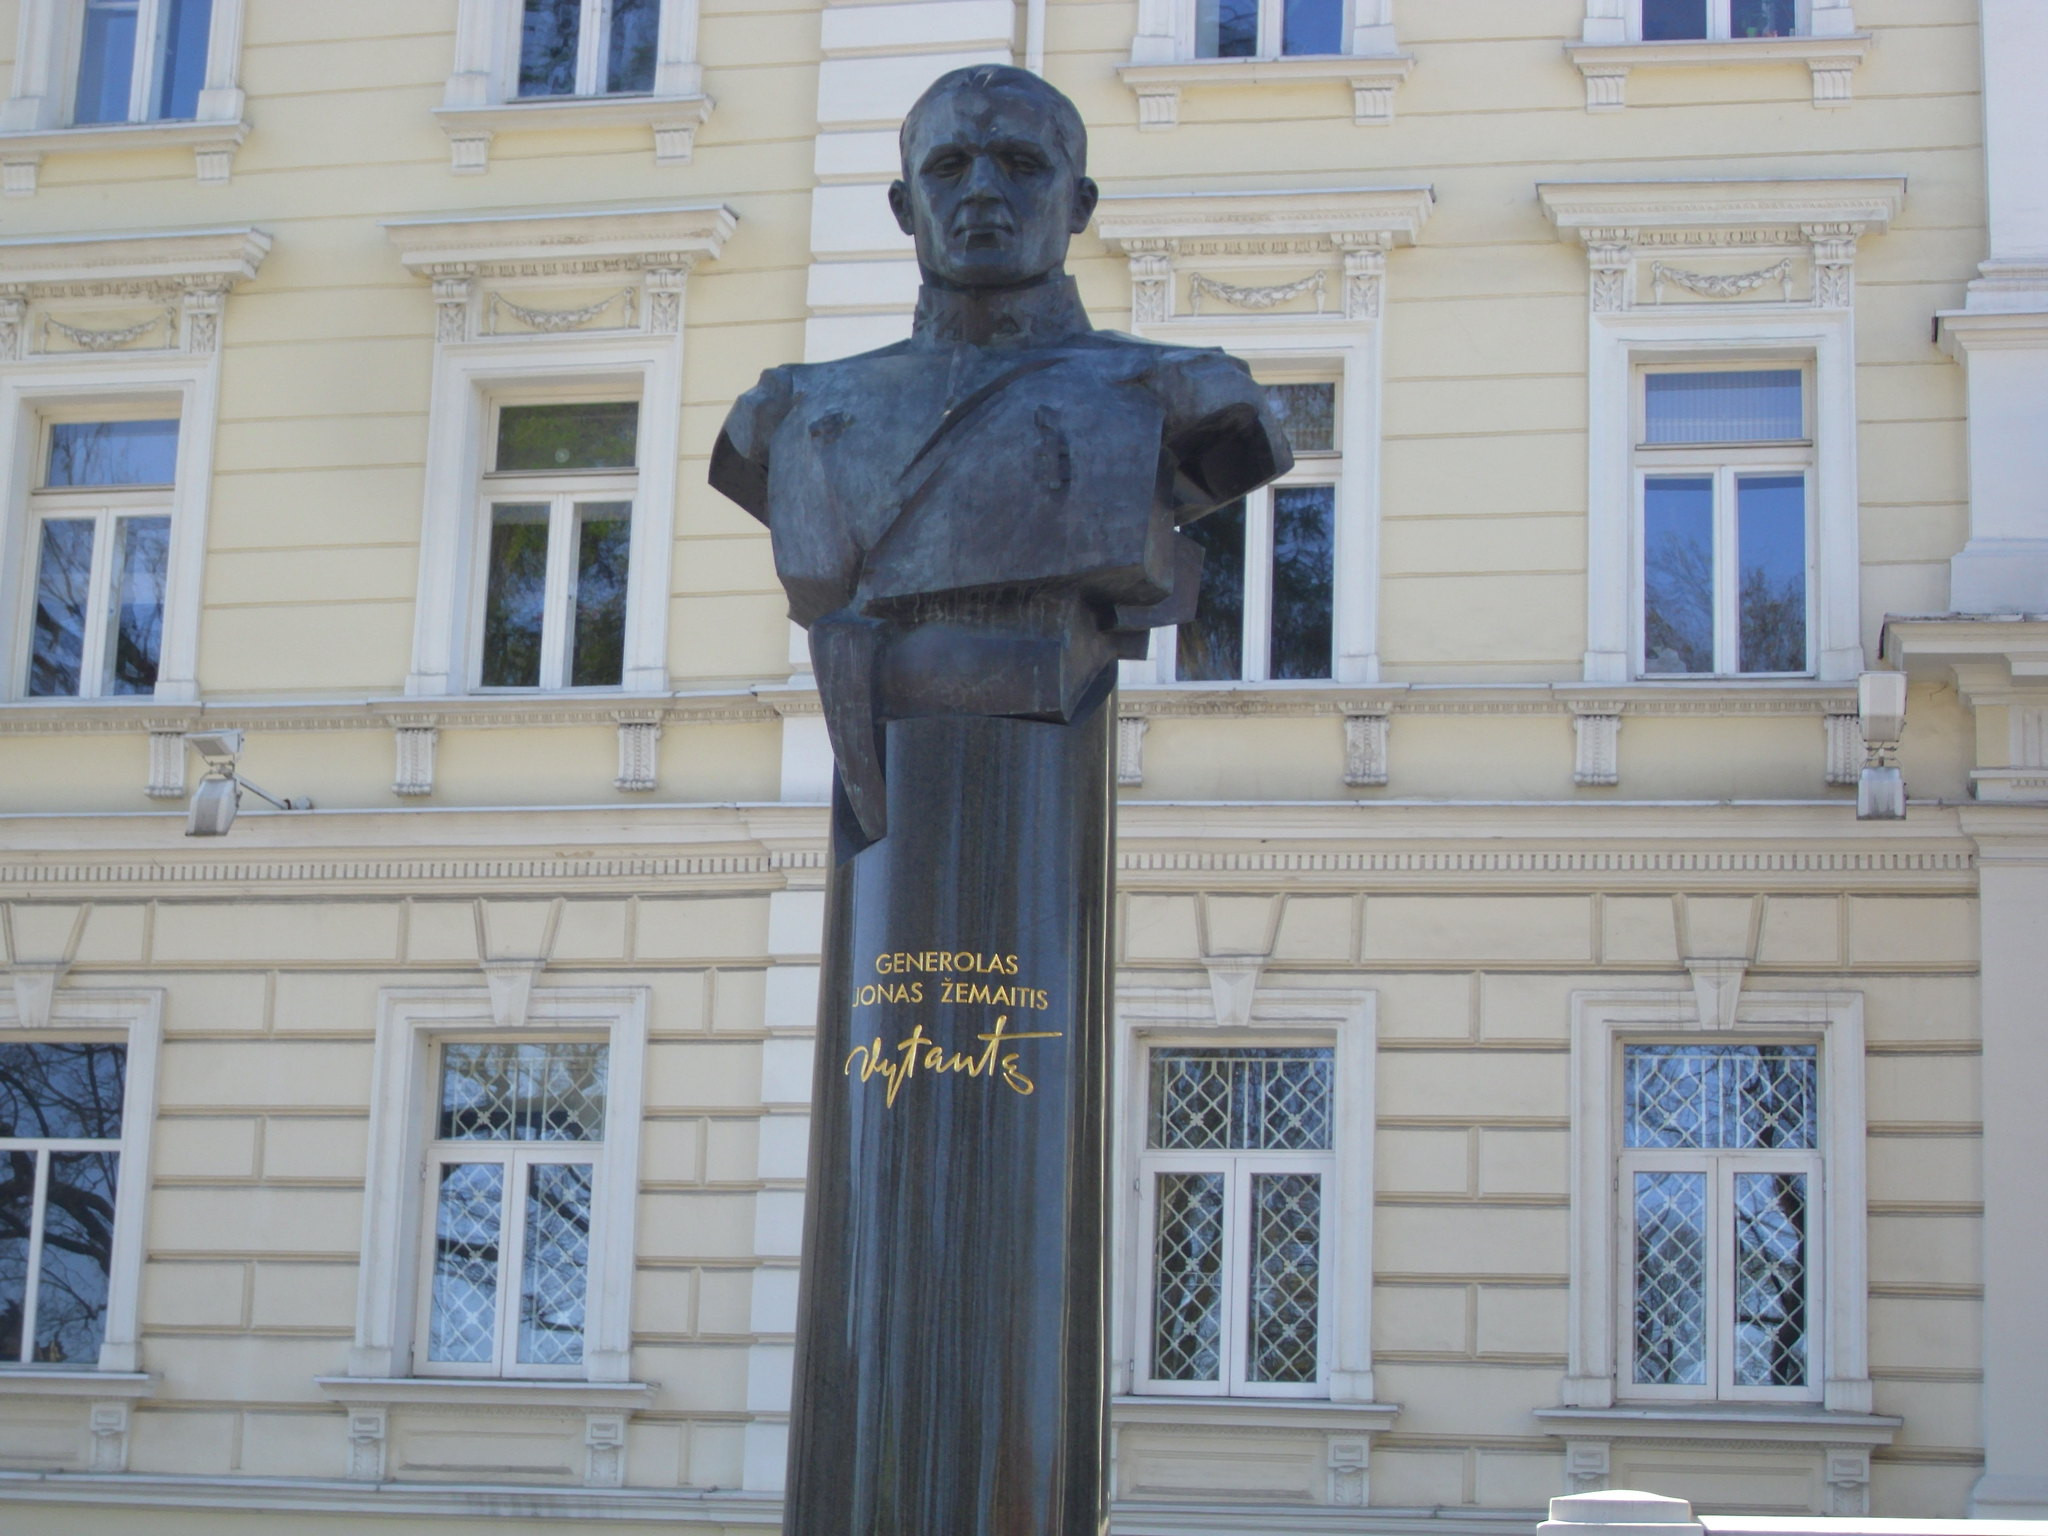 LY111A General Jonas Zemaitis statue, Lithuania